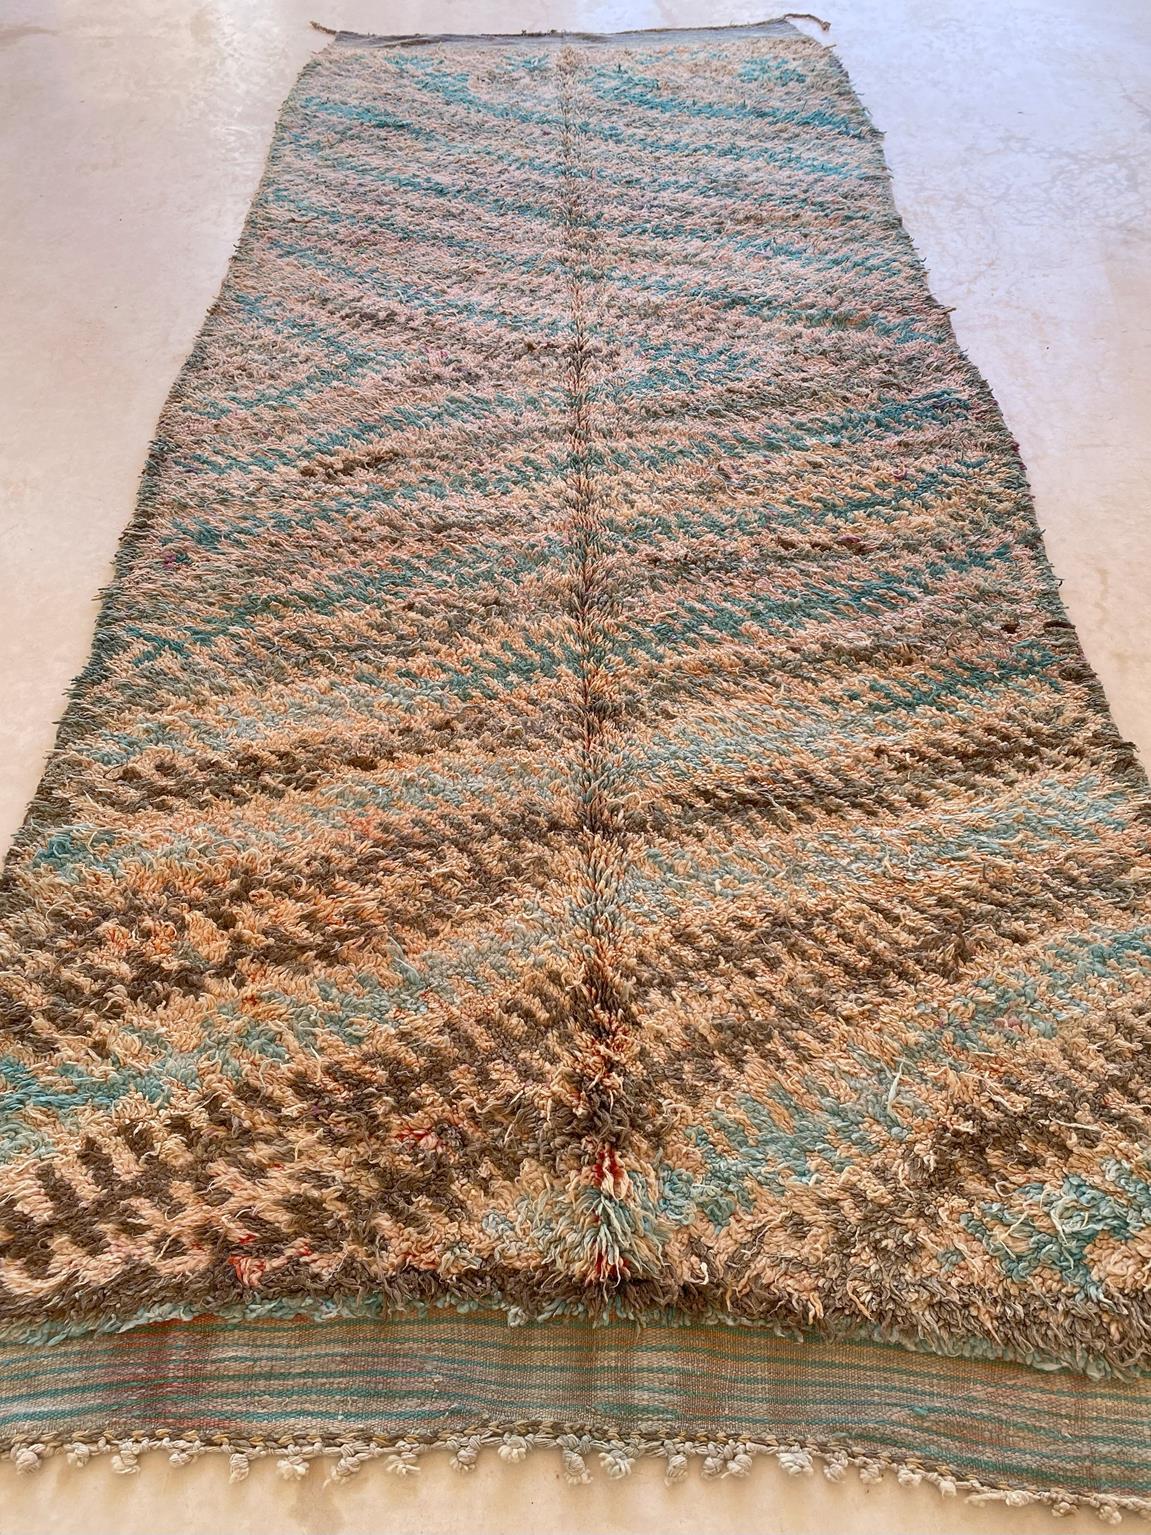 Wool Vintage Moroccan Talsint rug - Pink/gray/turquoise - 6.3x14.3feet / 193x436cm For Sale